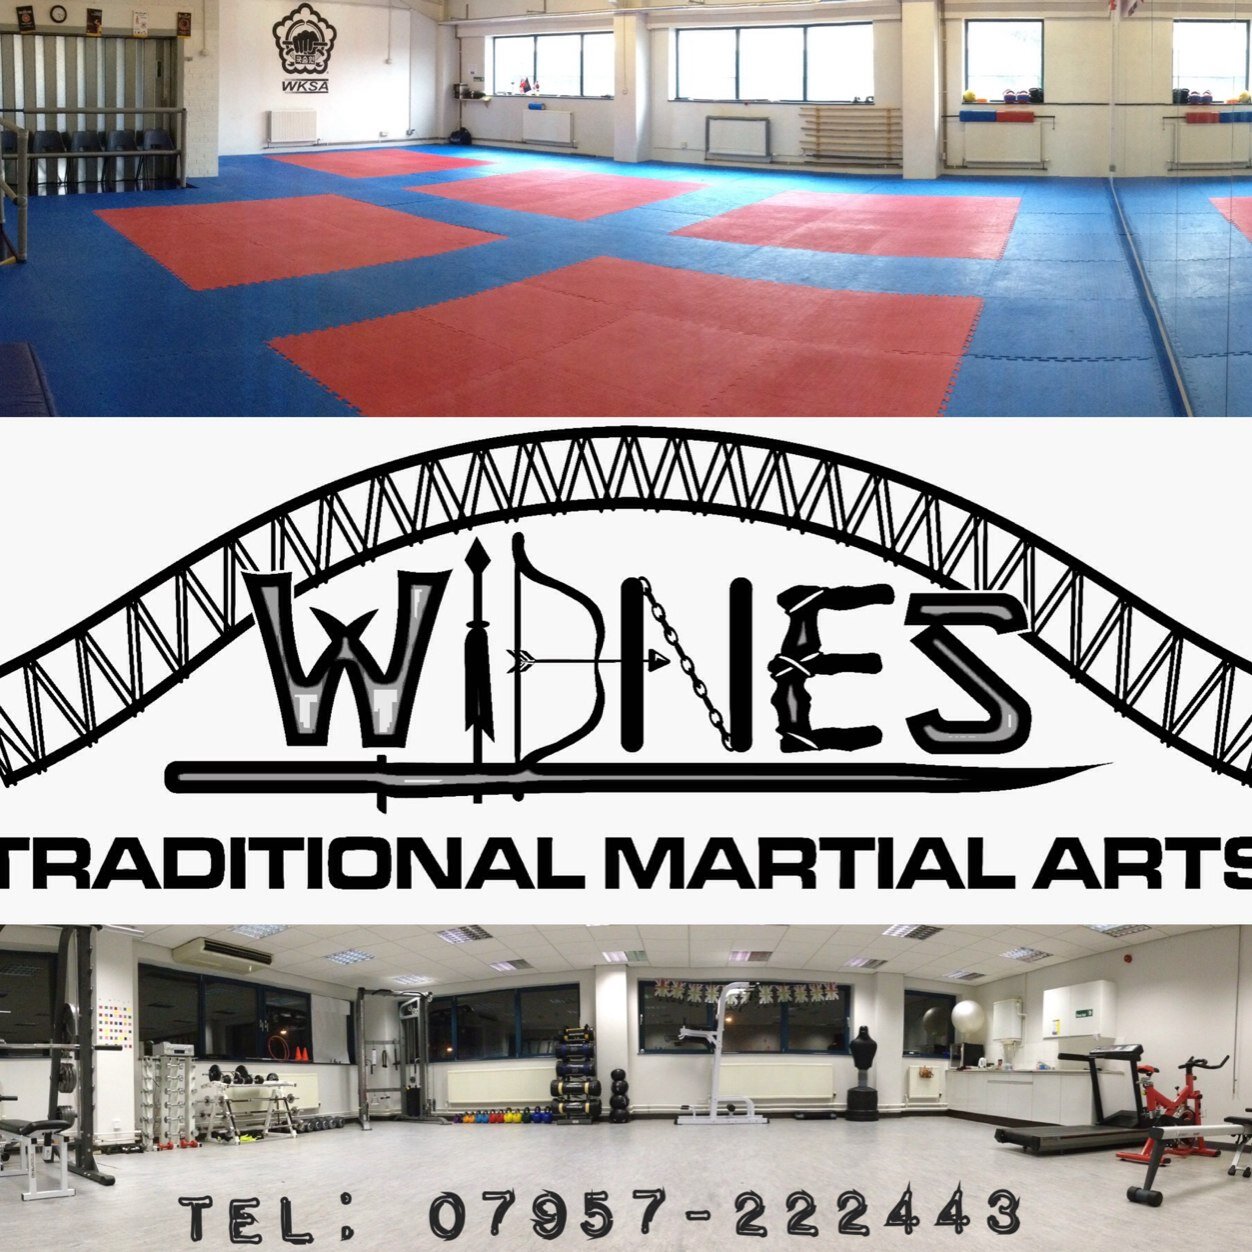 Martial arts centre and Gym. Kuk Sool Won classes for all ages. Come along for your free trial lesson. Instagram : kuksoolwidnes Facebook : kuksoolwidnes